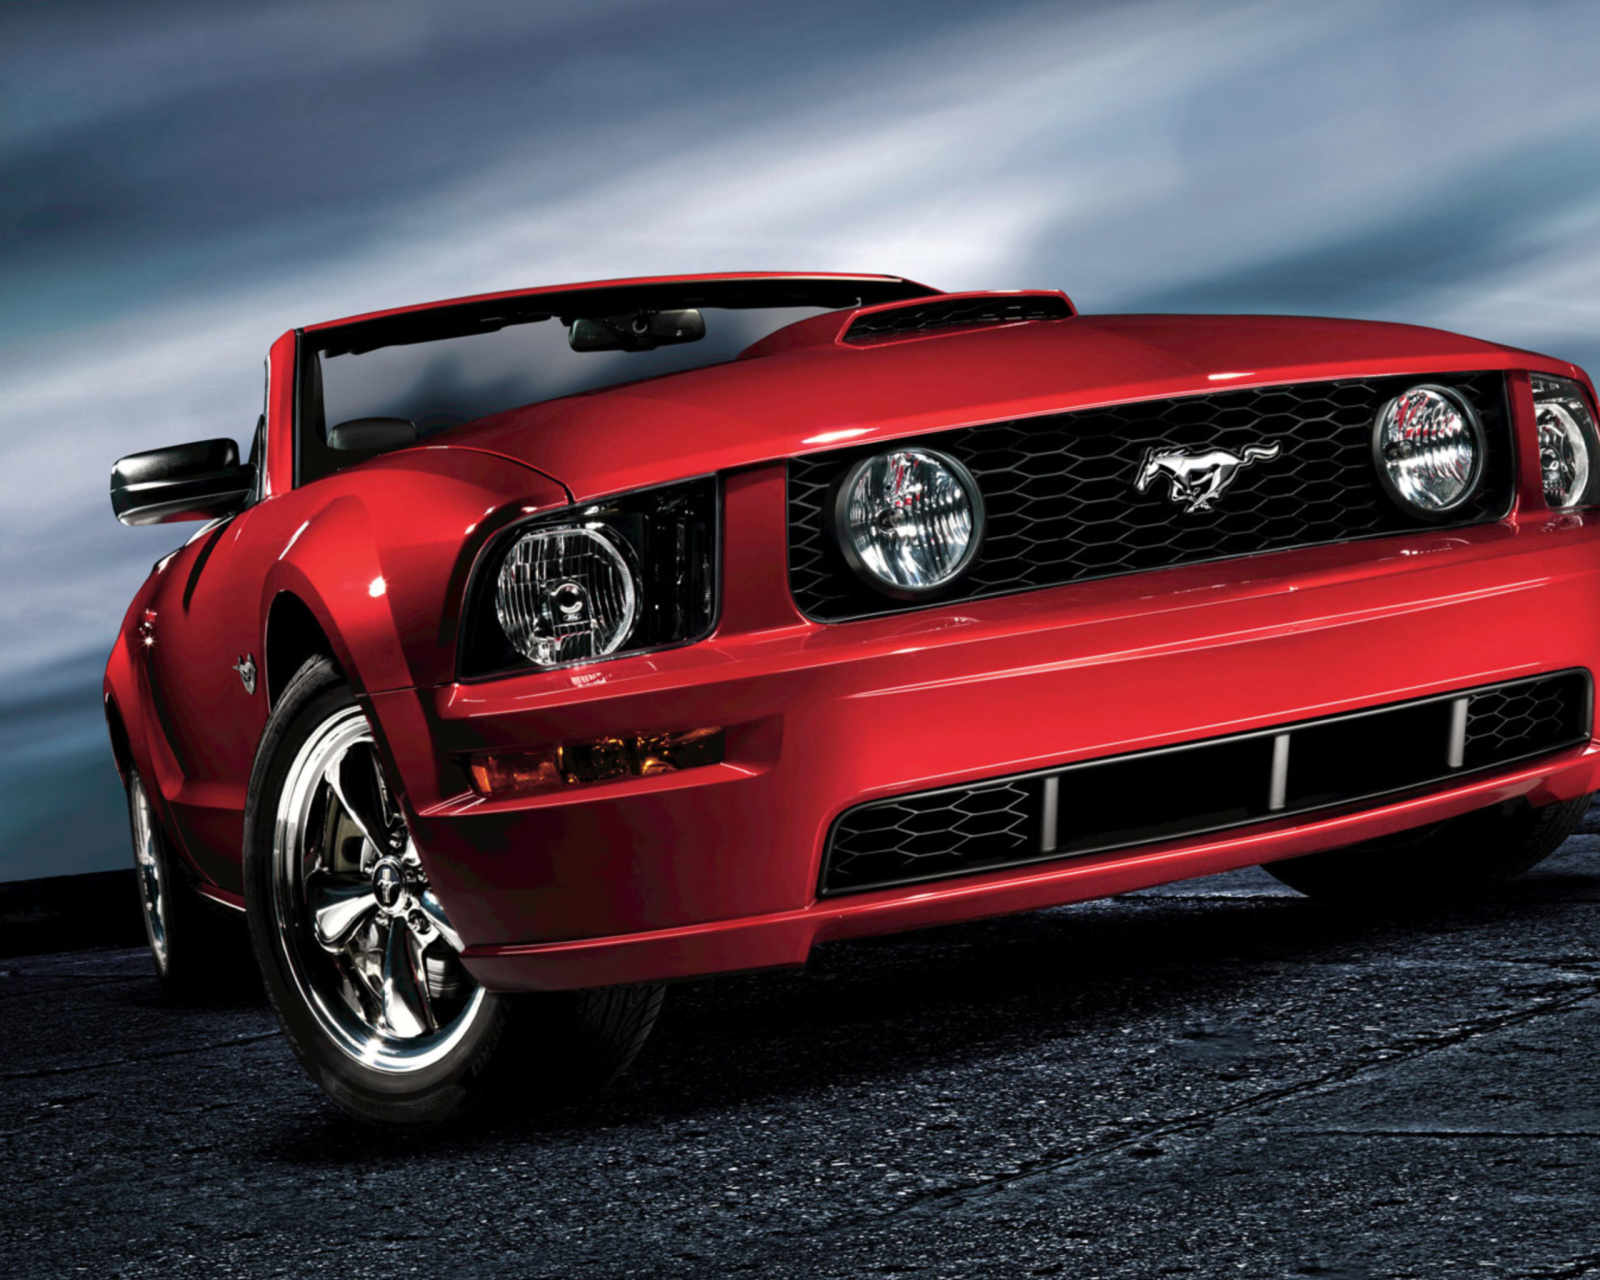 Ford Mustang Shelby GT500 wallpaper 1600x1280